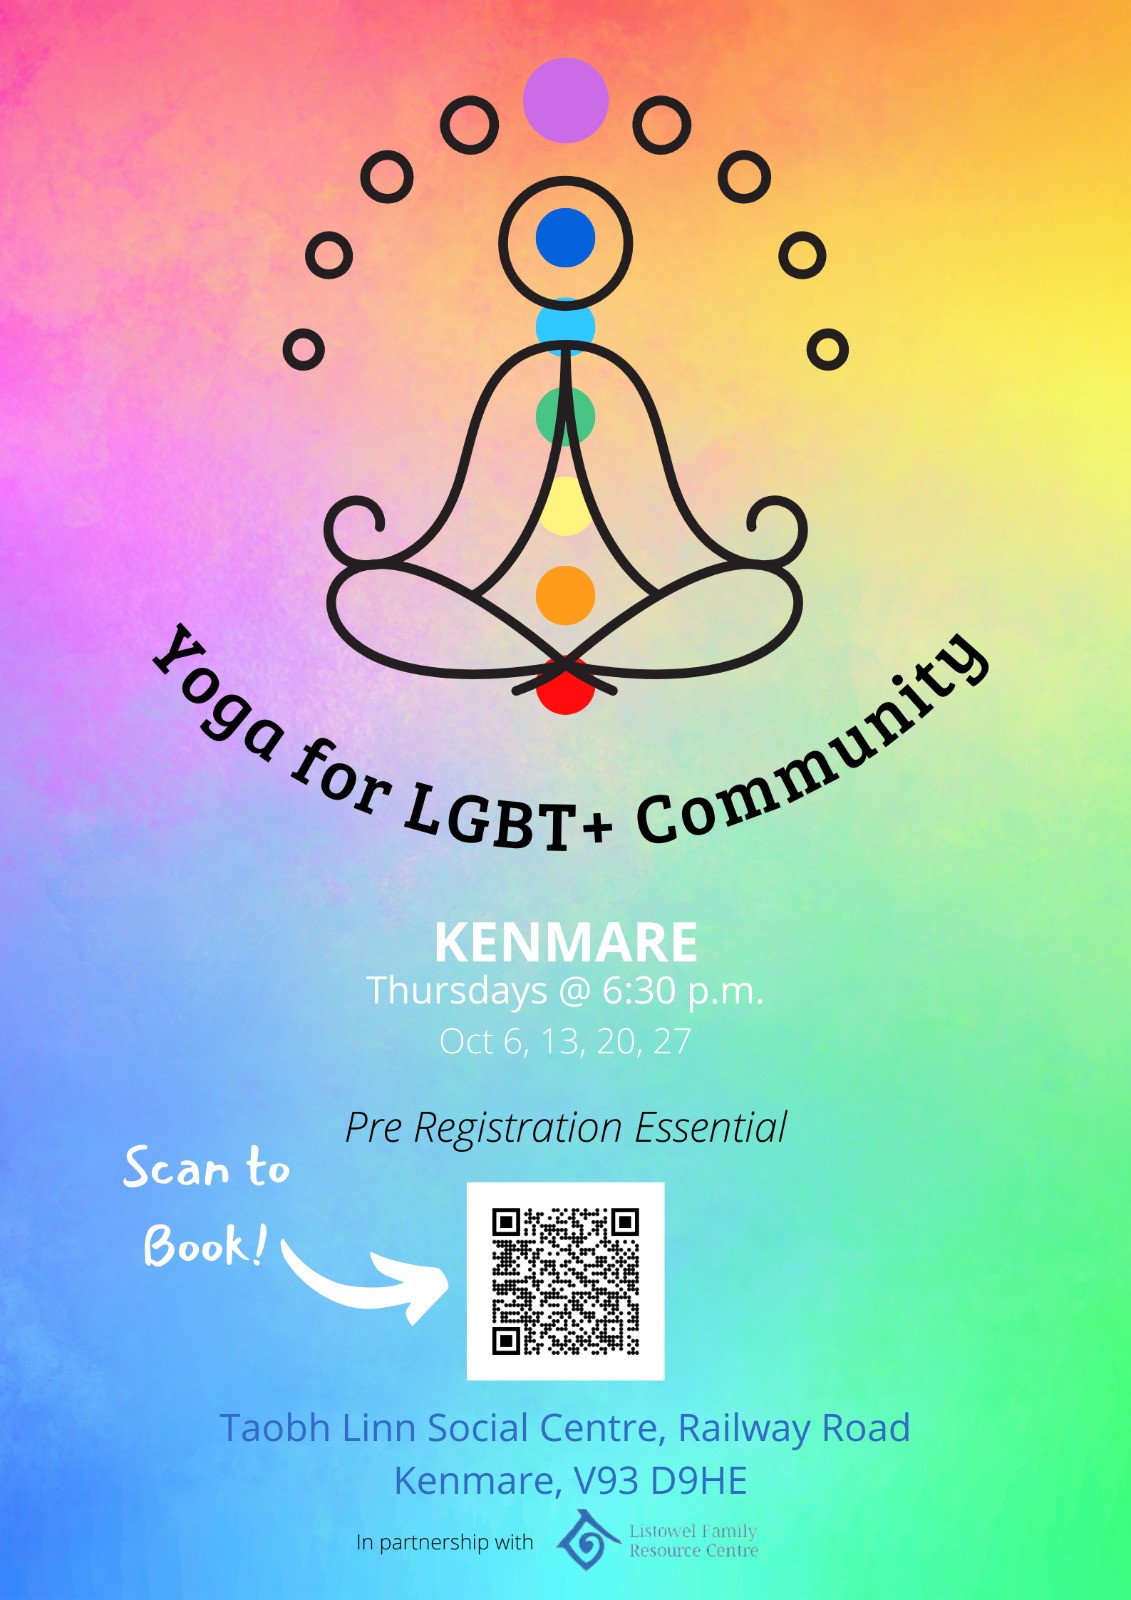 Yoga for the LGBT+ Community - Kenmare event at Kerry Mental Health & Wellbeing Fest 2022